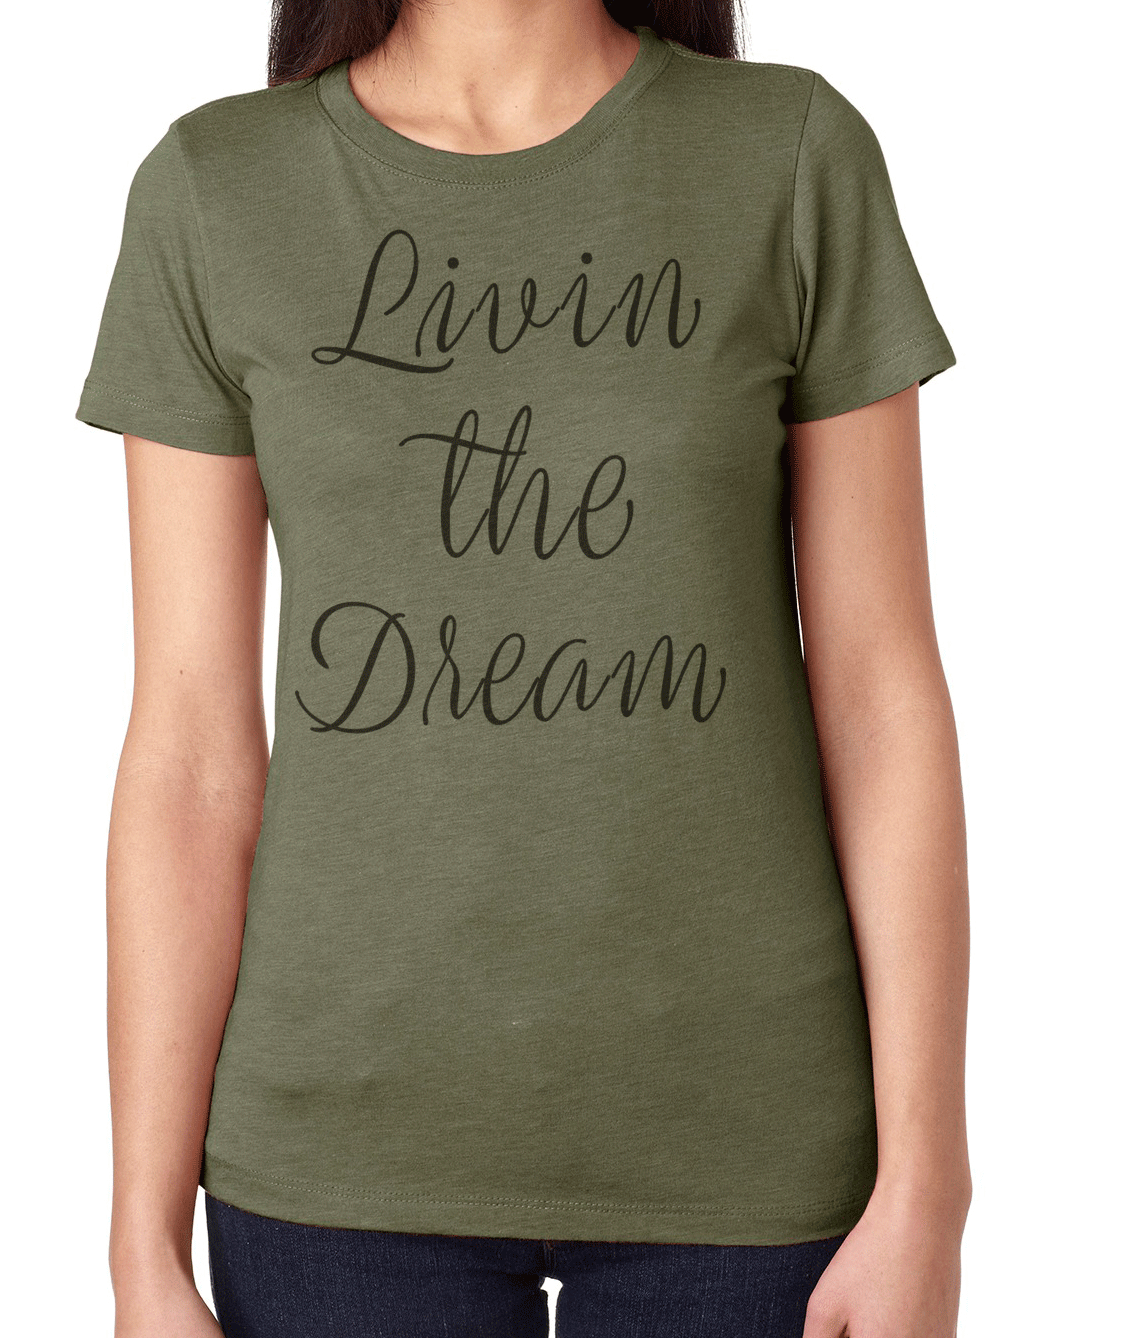 LIVIN THE DREAM Graphic Tee for Women